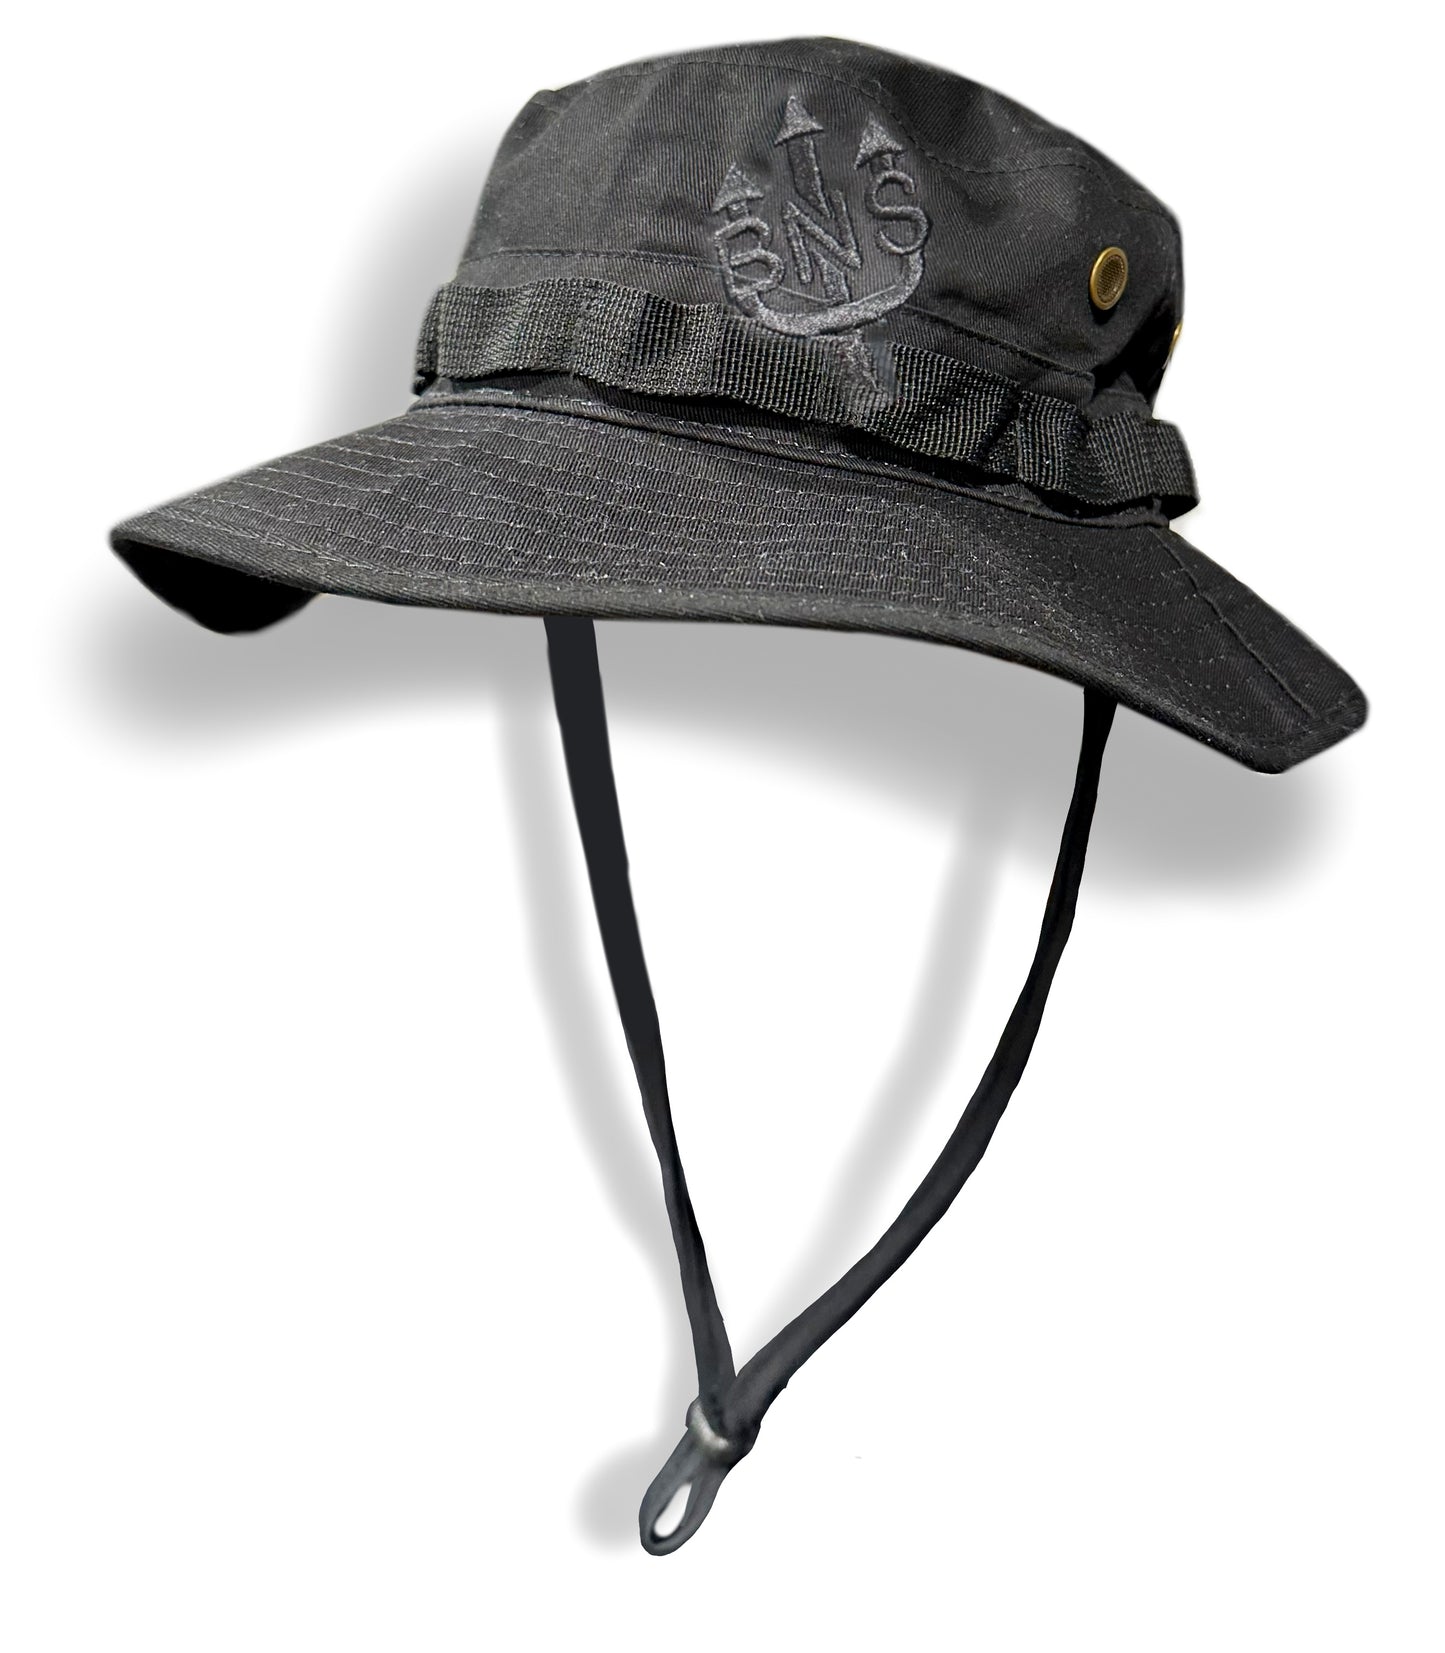 BNS embroidered hikers hat